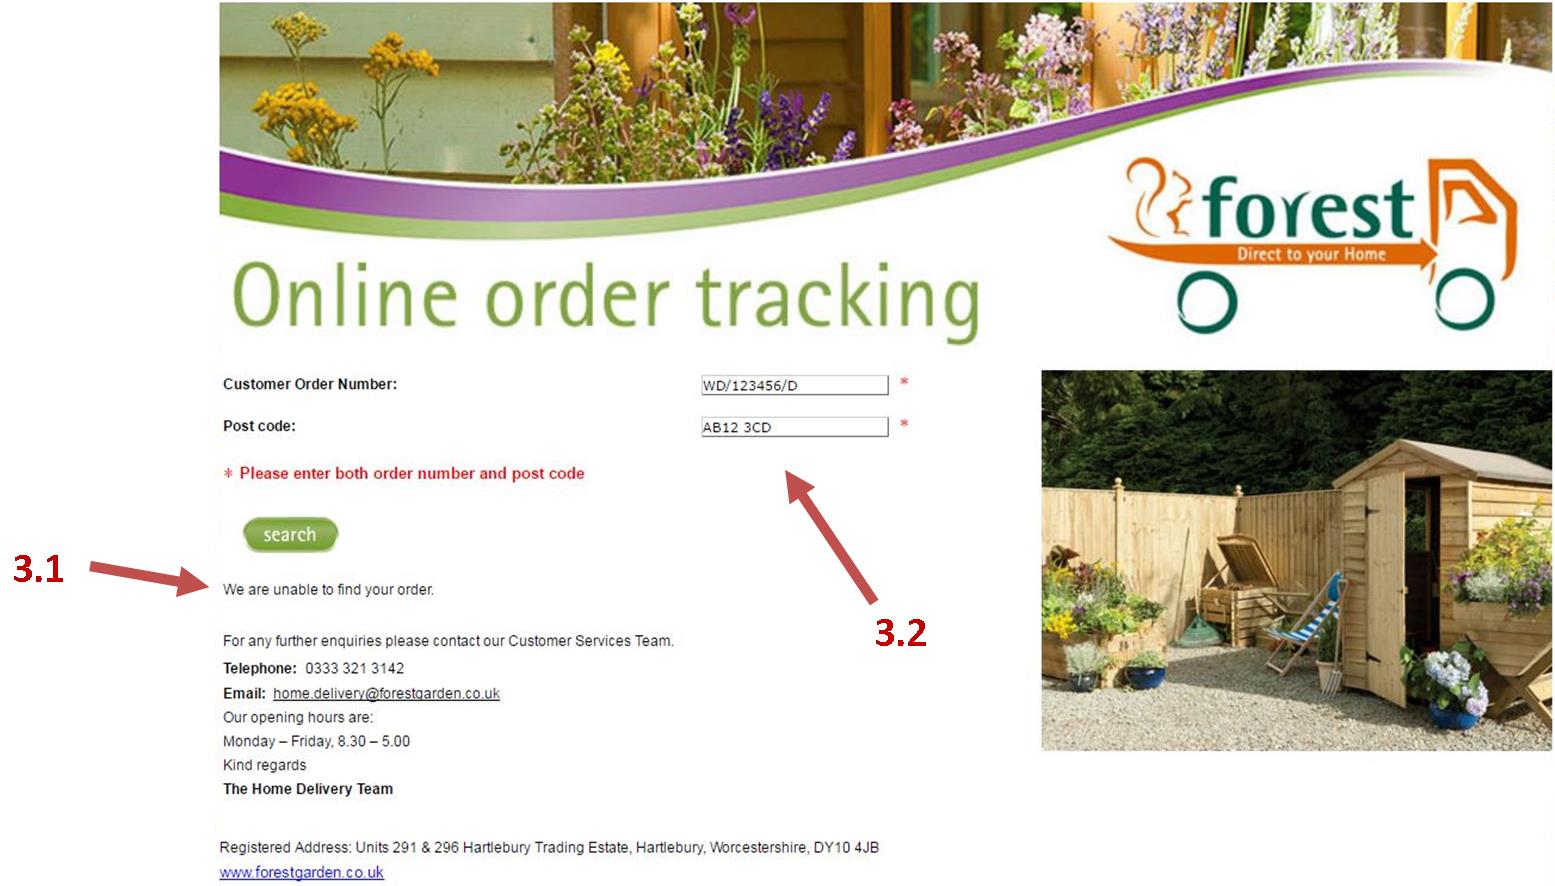 Booking your Wonkee Donkee Forest Garden delivery